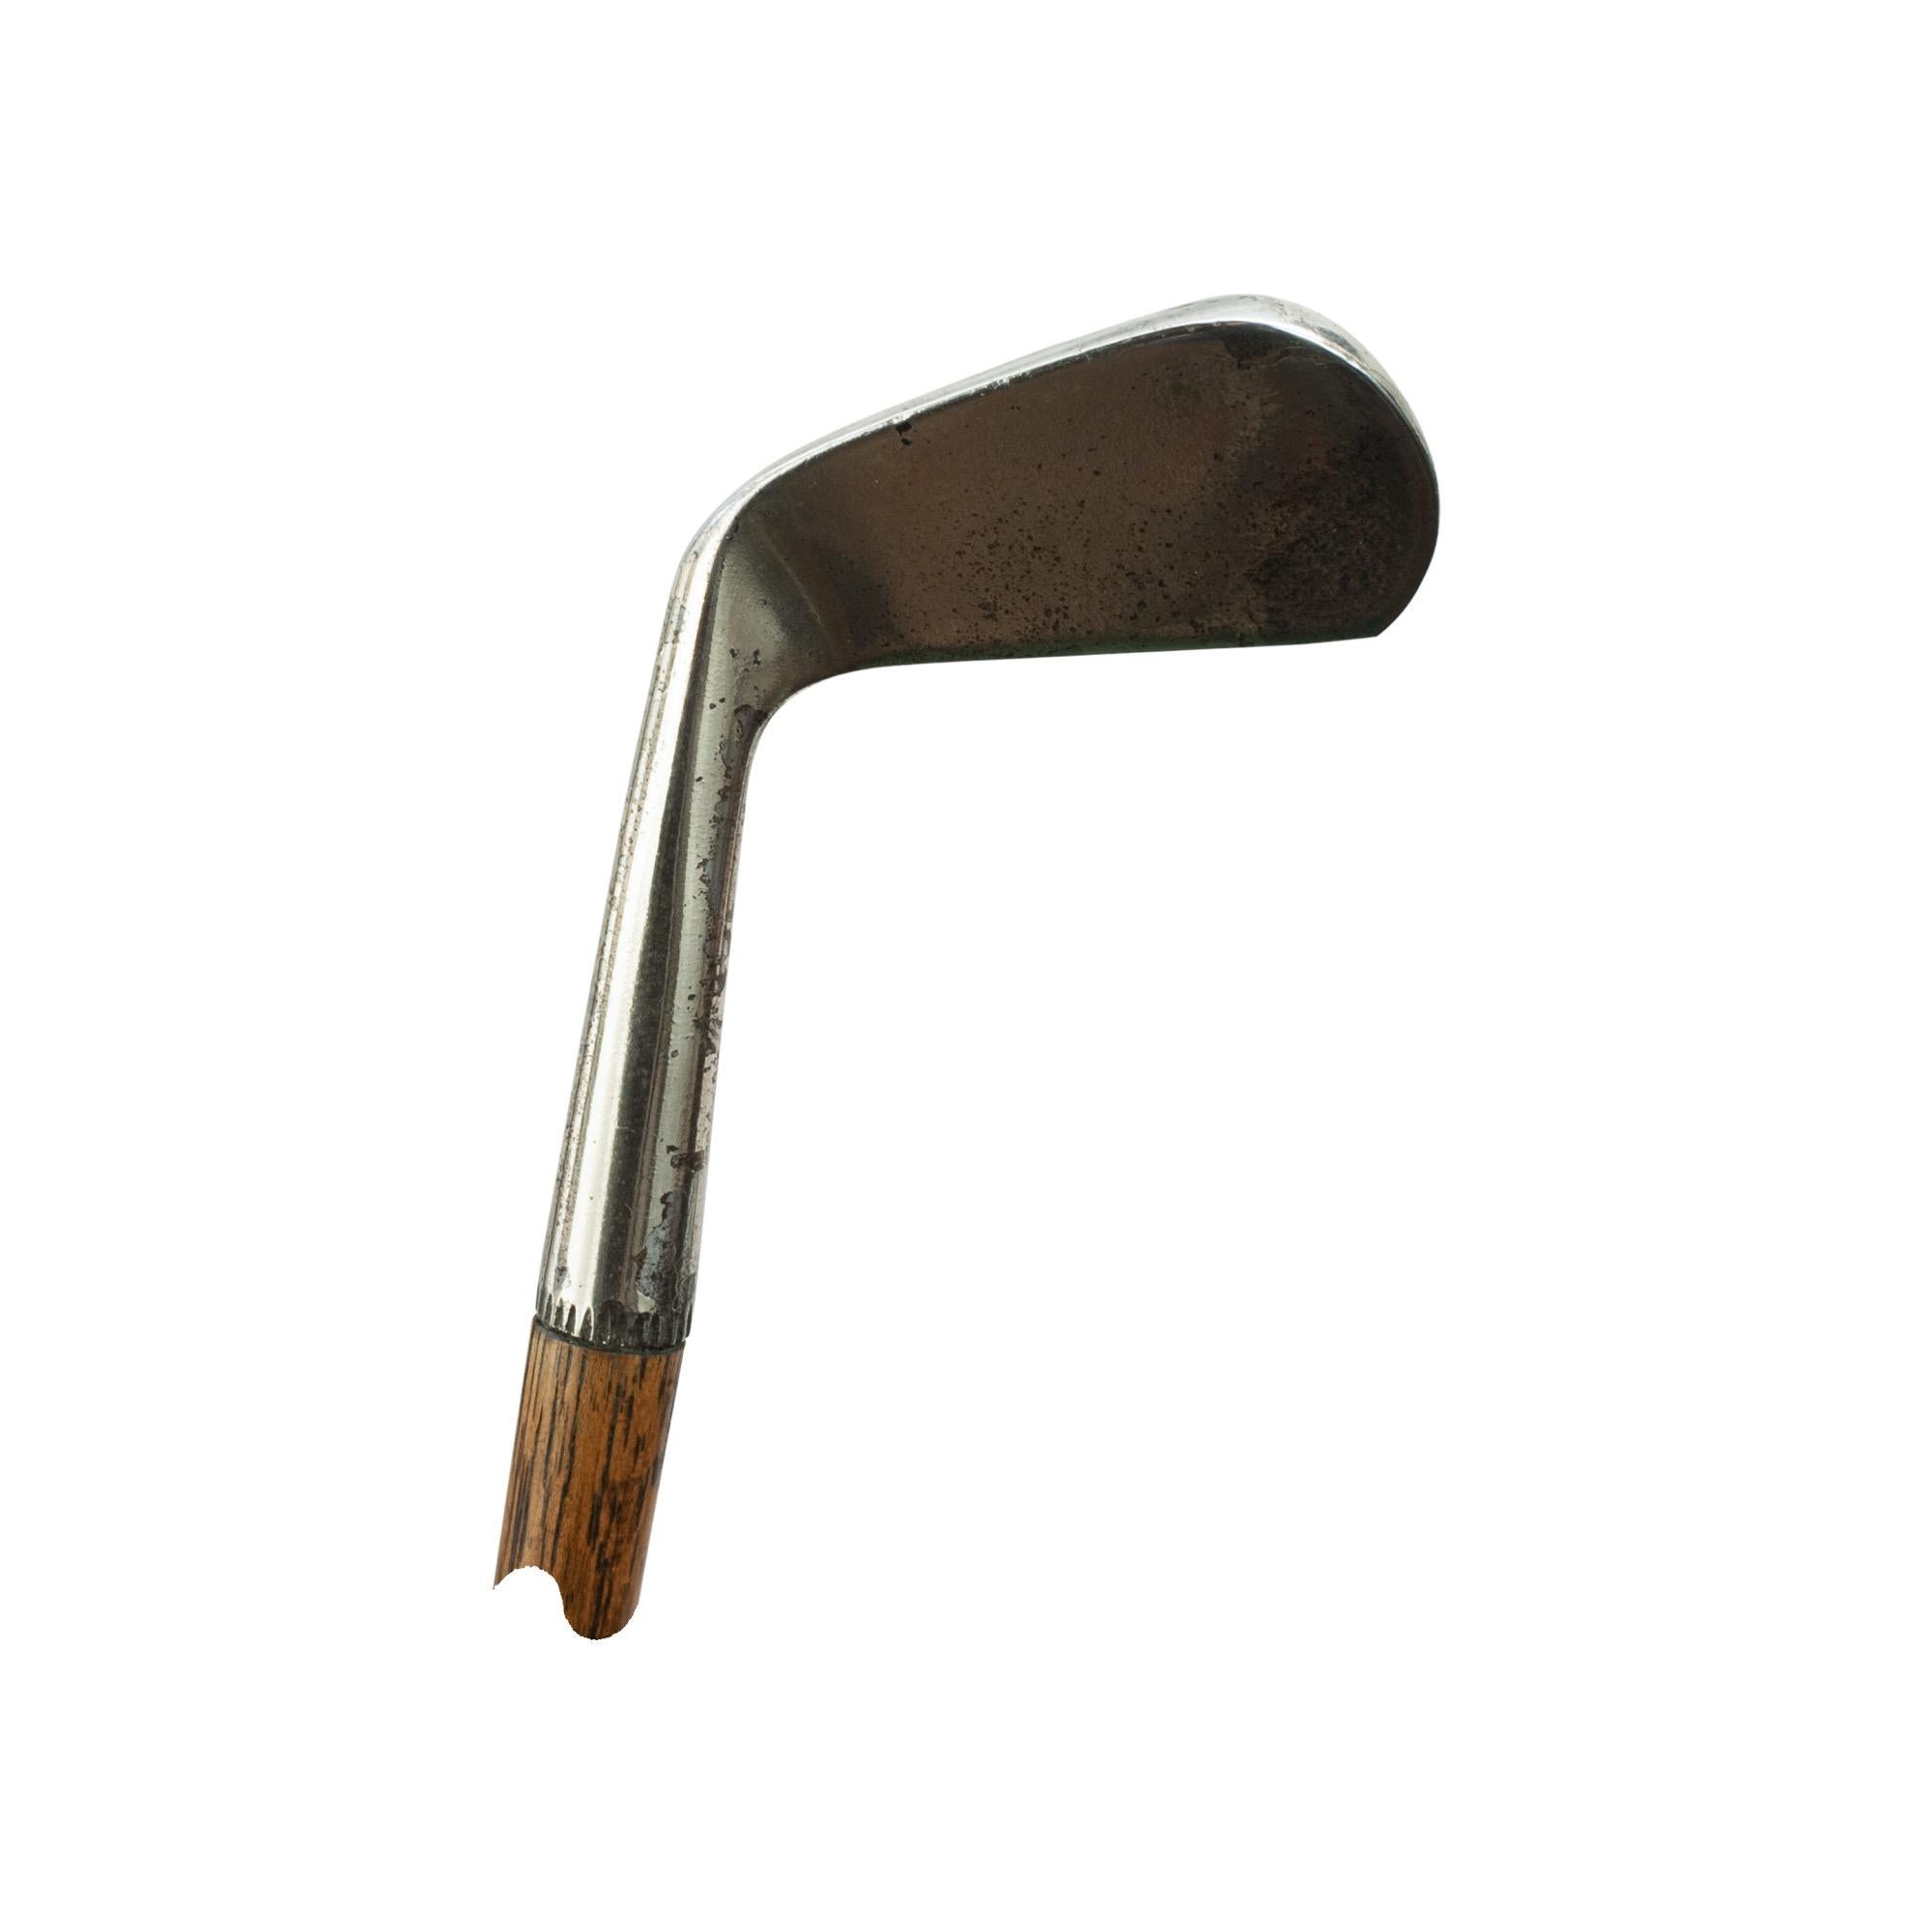 Antique Charles L. Millar golf walking stick, Glasgow.
A desirable walking cane with the handle in the shape of a diamond back golf club head made by Charles L. Millar, Glasgow. The gentleman's walking stick has an iron club head handle stamped